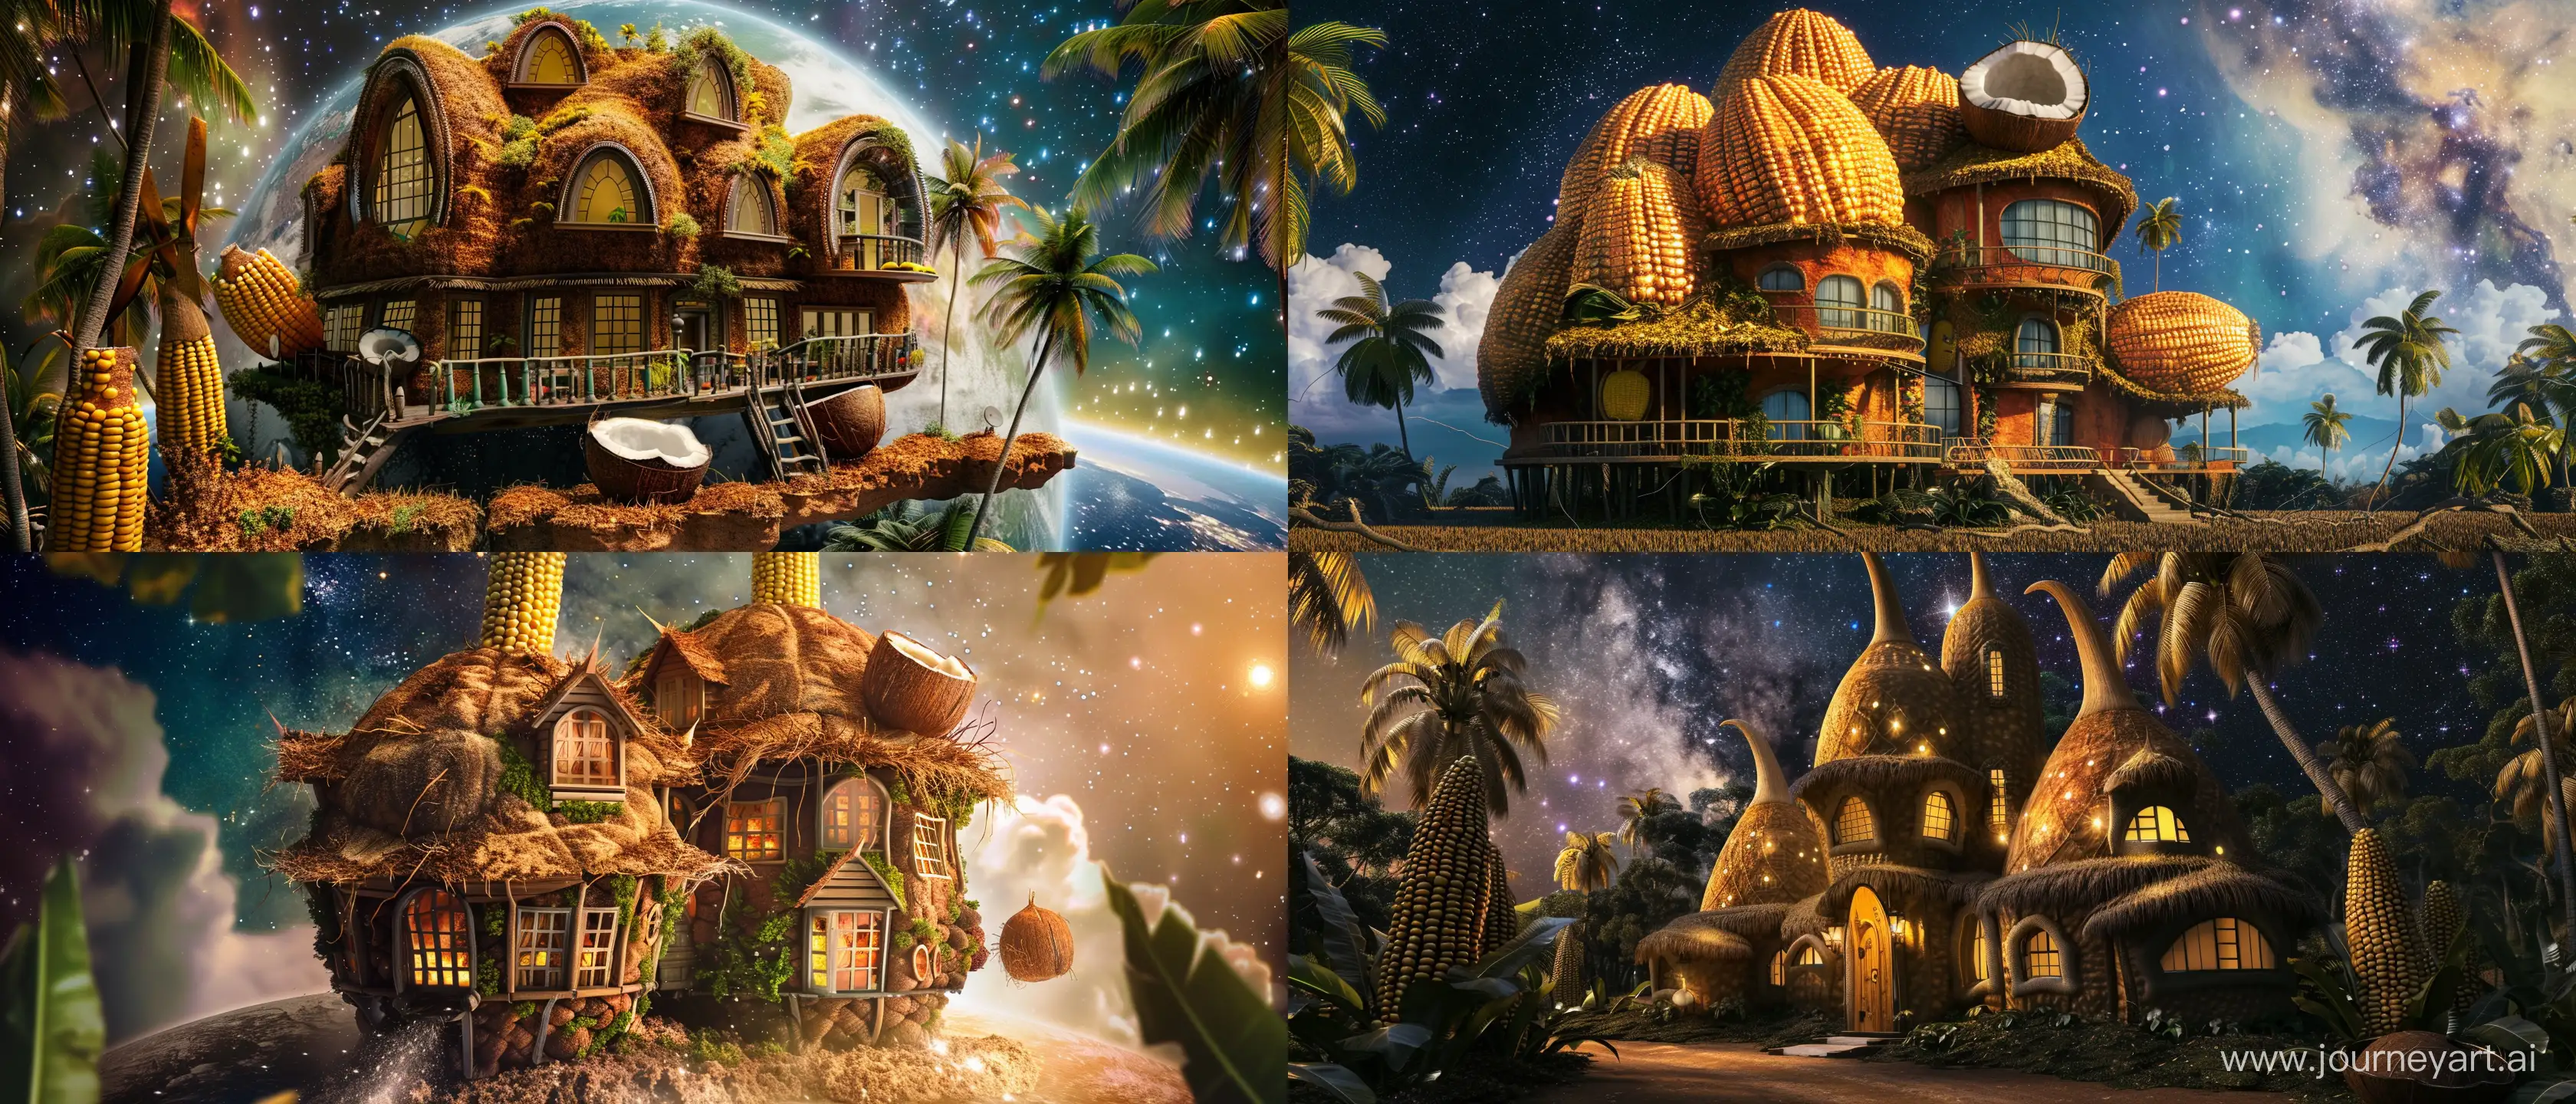 Fantasy-Corn-and-Coconut-House-in-Galactic-Landscape